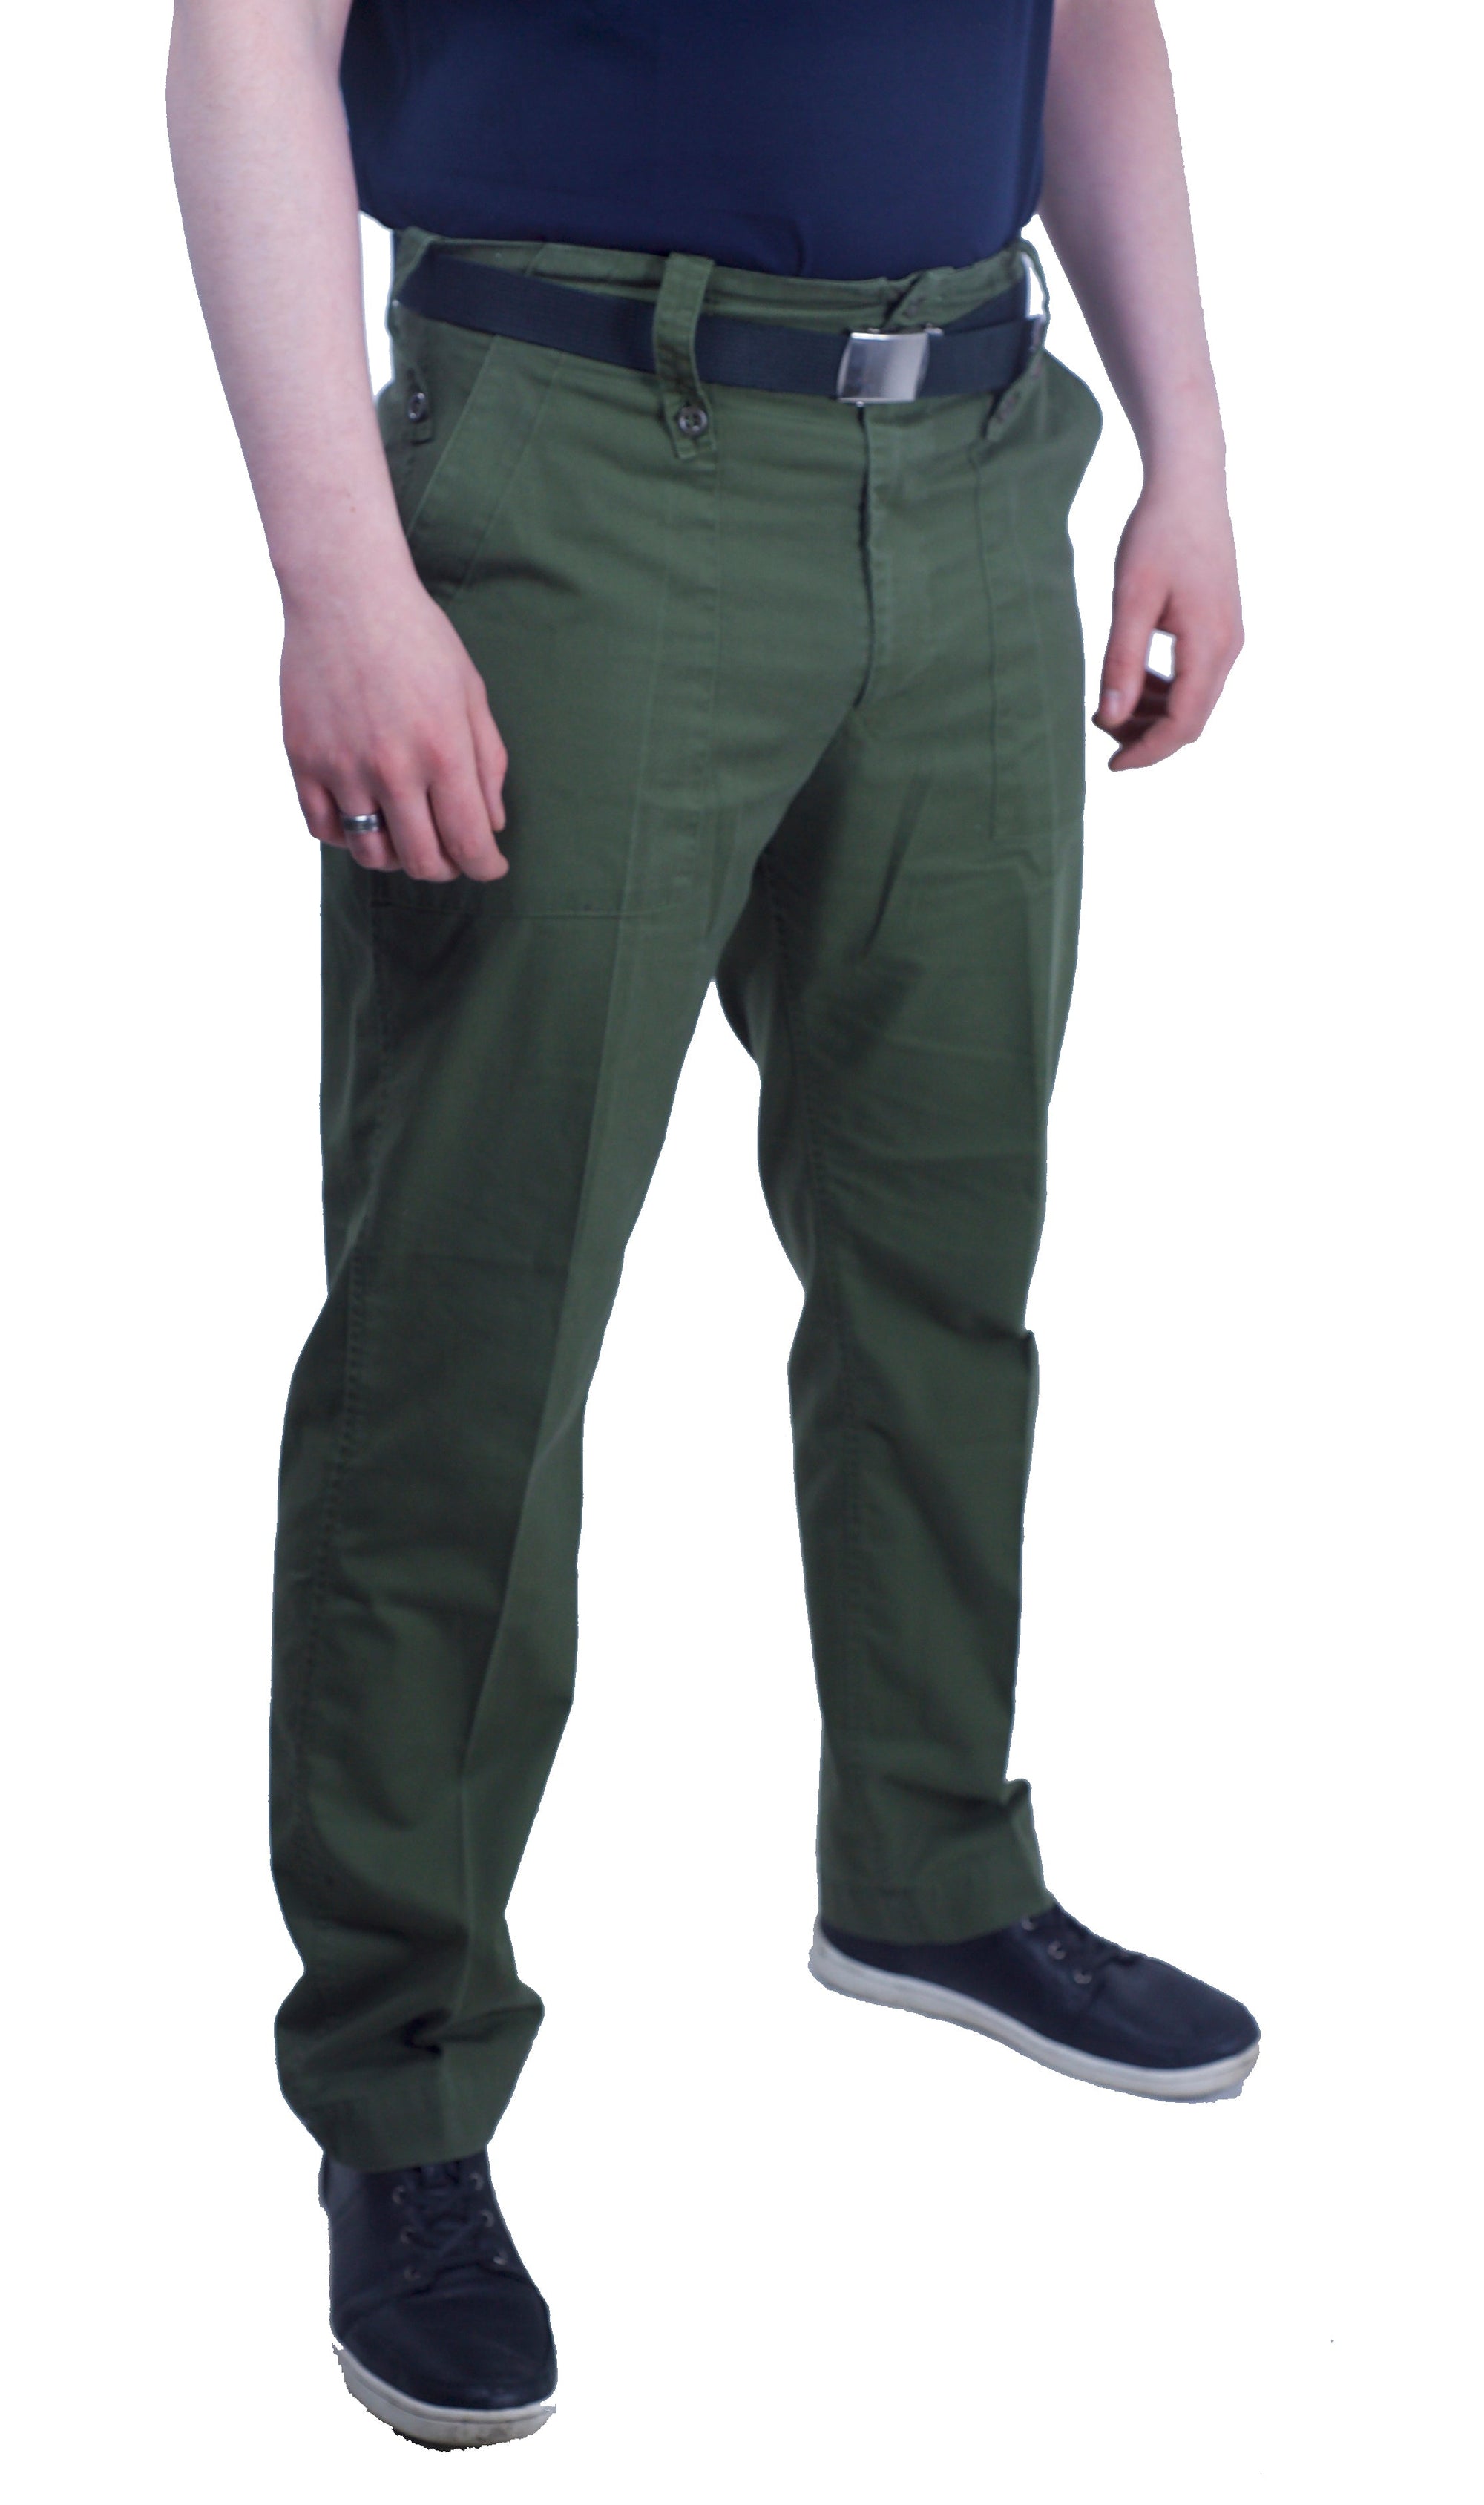 British Army Lightweight Olive Green Trousers - DISTRESSED RANGE